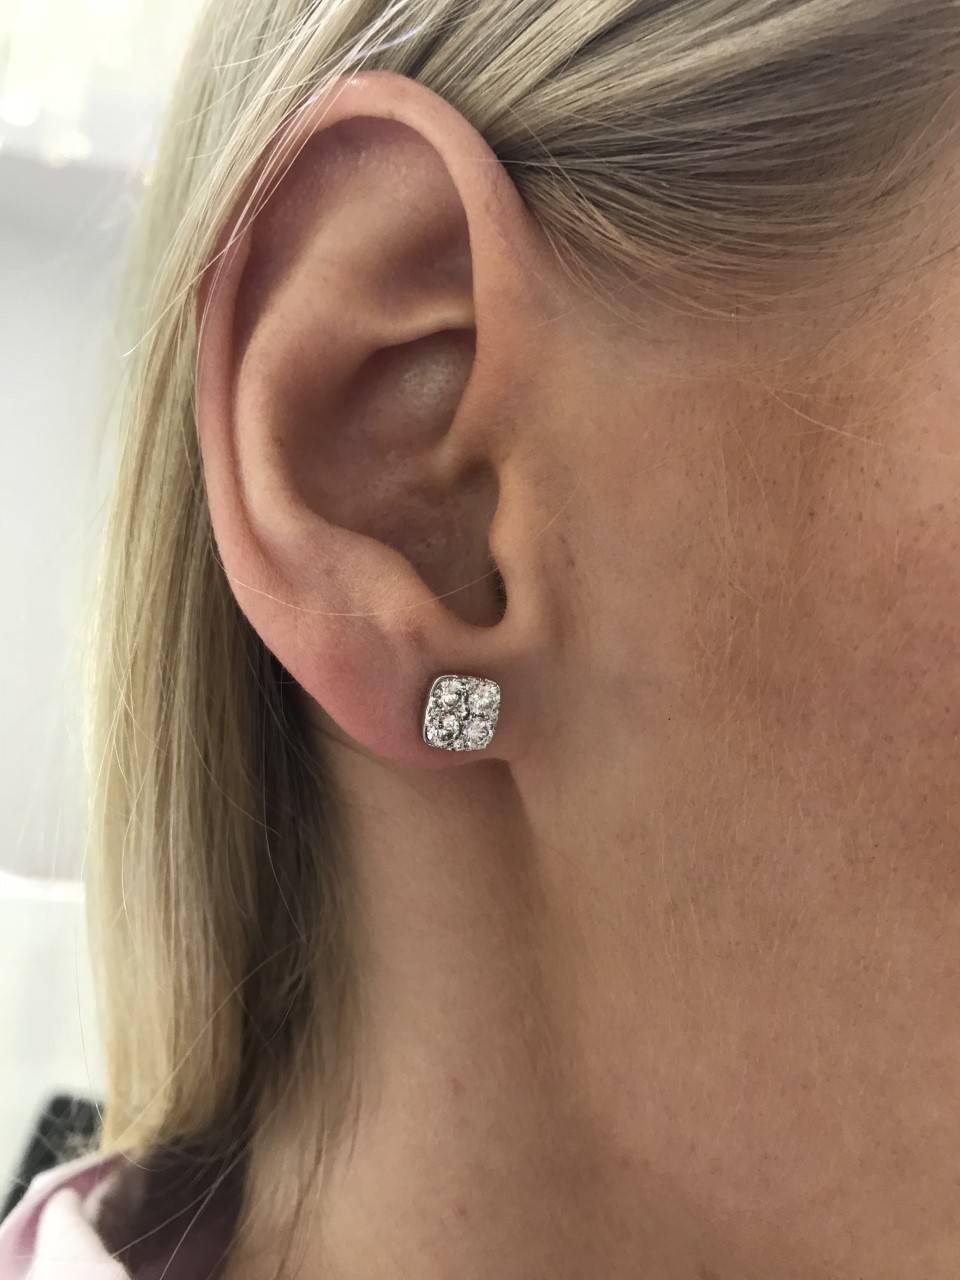 These eye catching elegant Round Brilliant Diamond cluster stud earrings featuring white colour H - clarity SI diamonds that sparkle, set in 18 Karat White Gold. These curved-corners square shaped pave set cluster studs have a total diamond weight